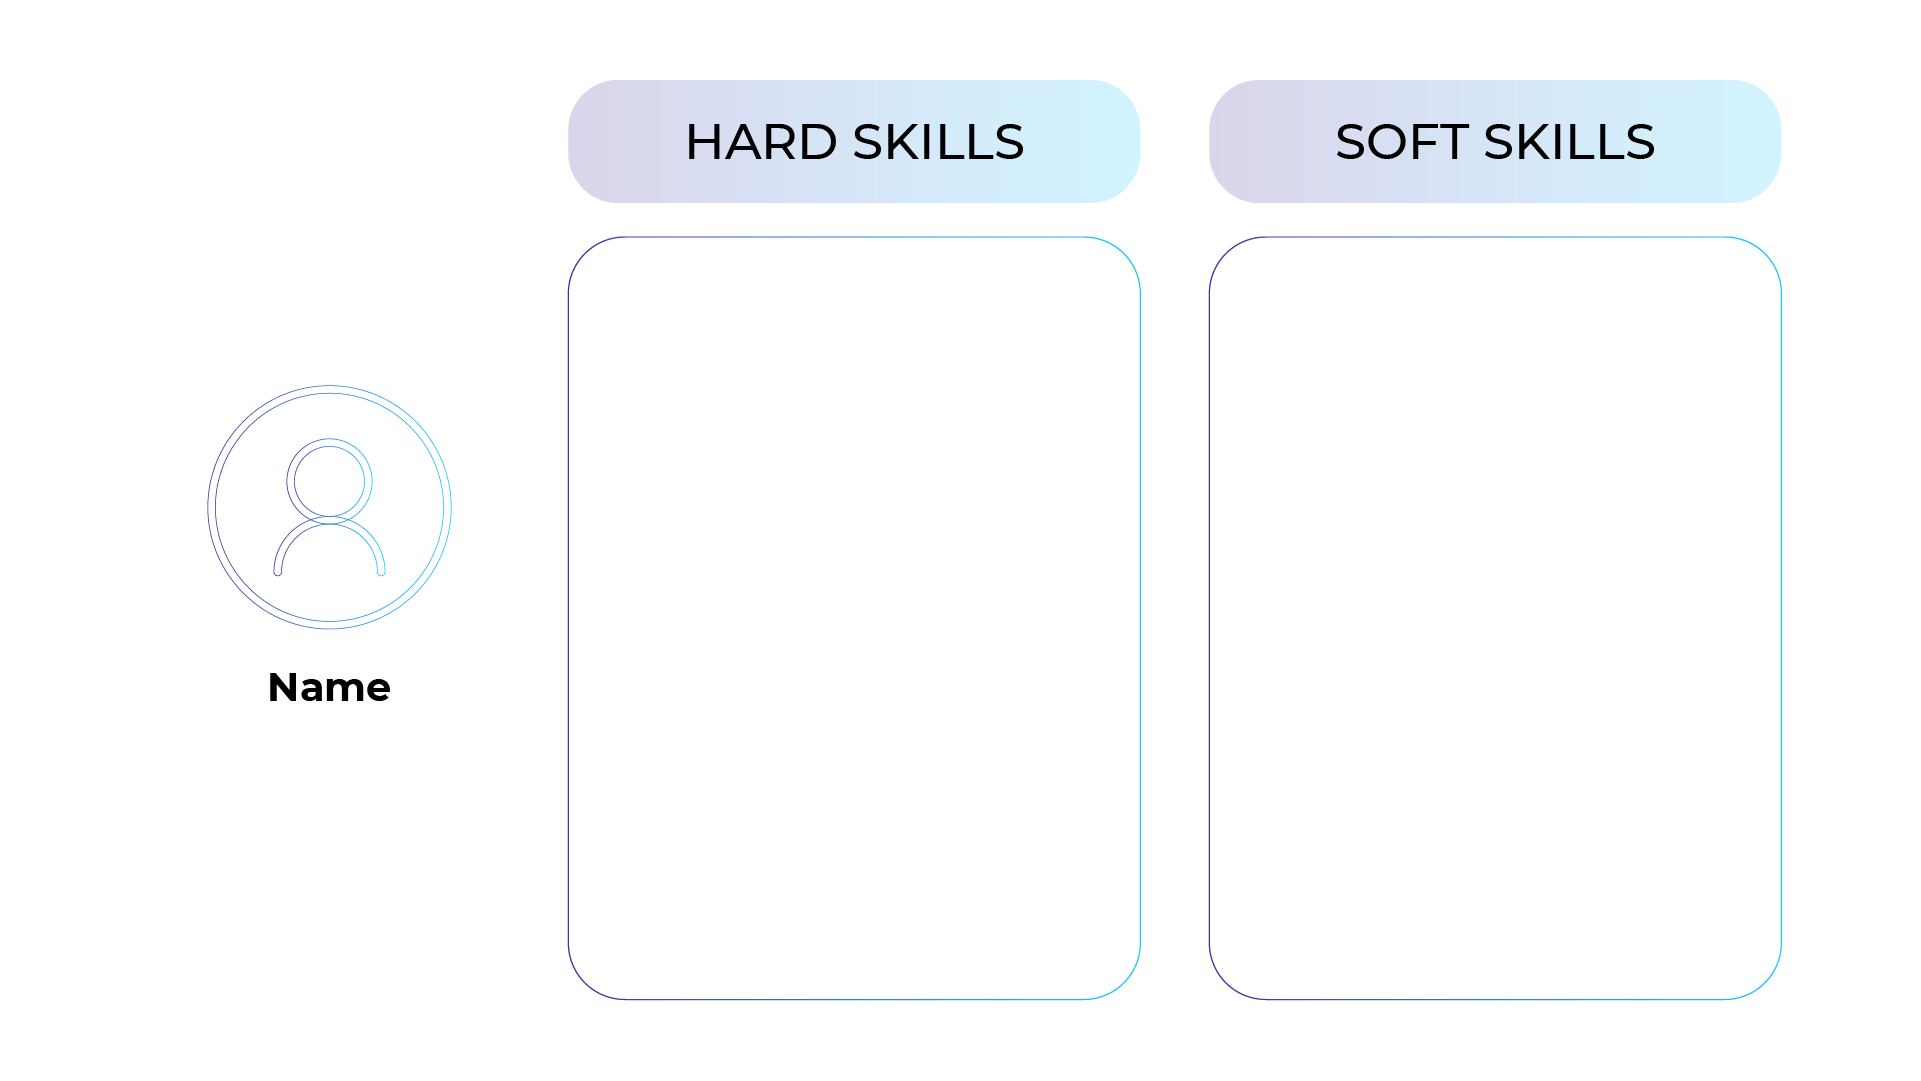 Complete this table with soft and hard skills